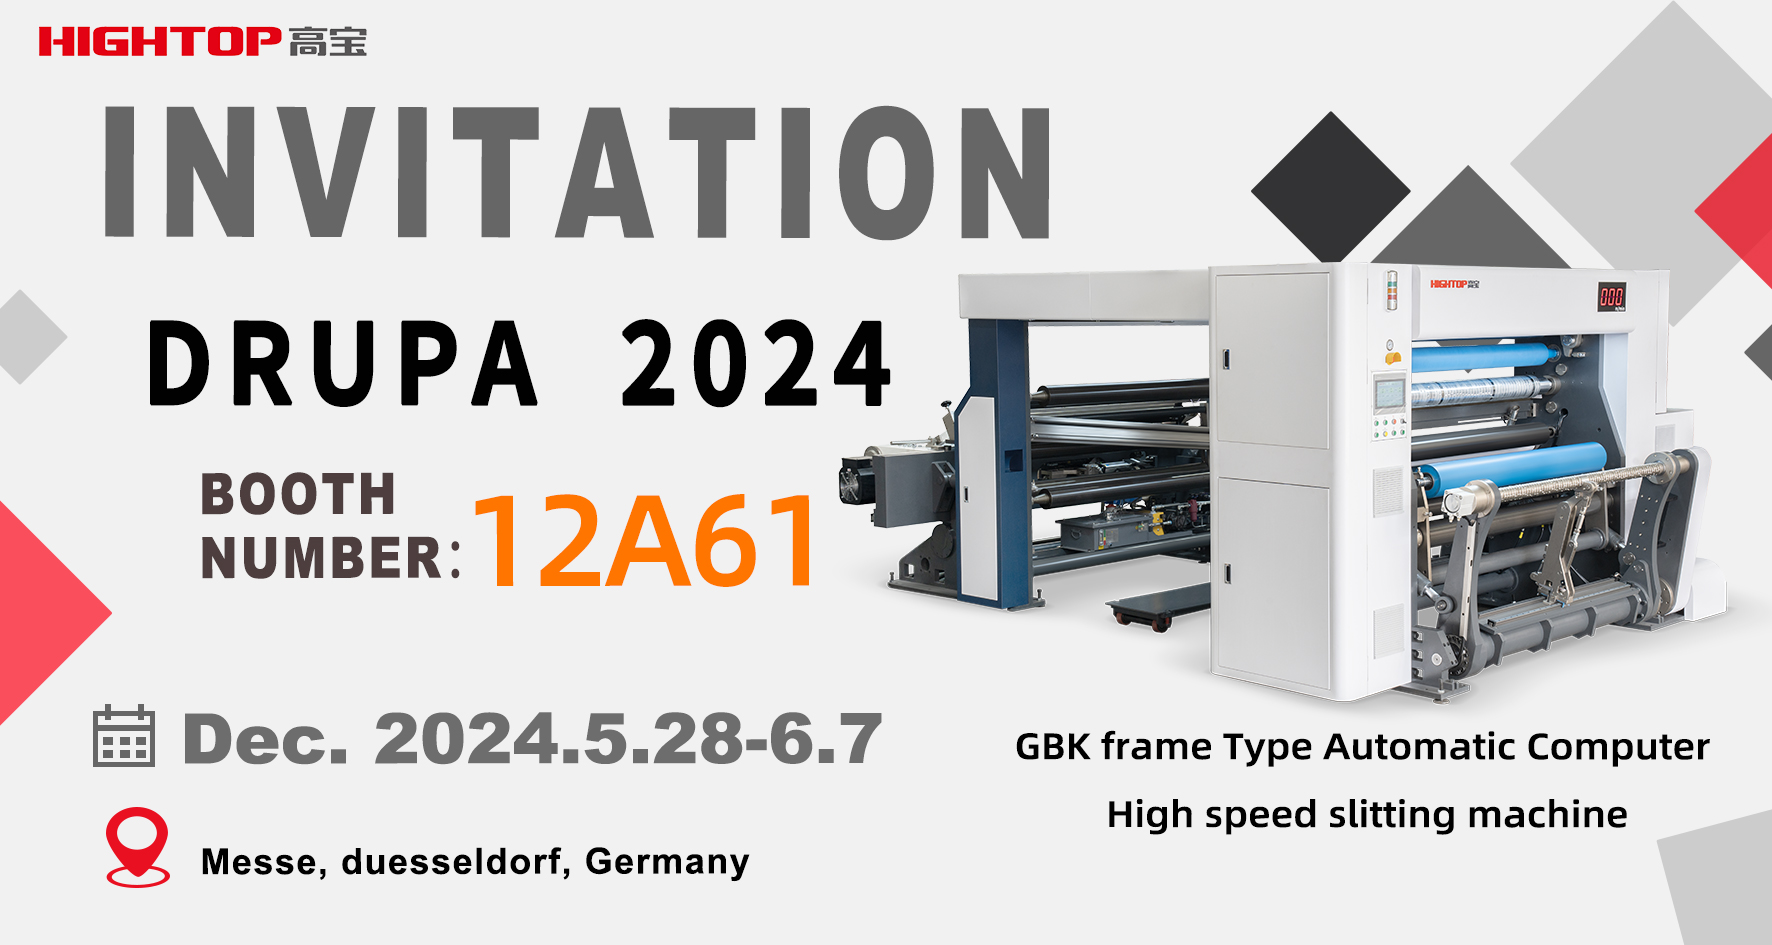 hightop-invites-you-to-explore-new-horizons-in-slitting-technology-at-drupa-2024.jpg